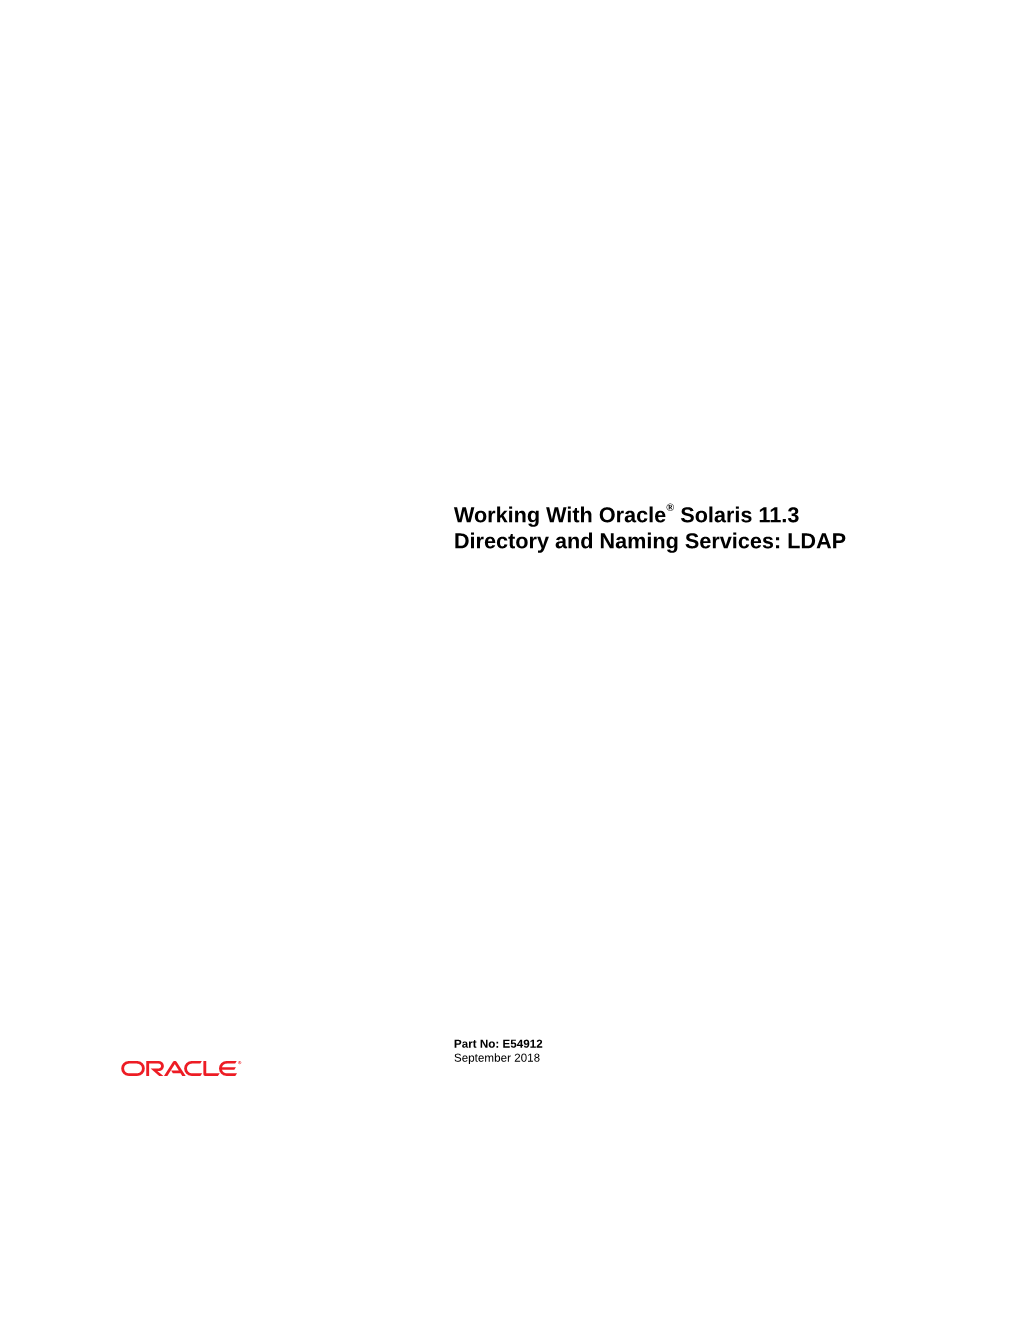 Working with Oracle® Solaris 11.3 Directory and Naming Services: LDAP